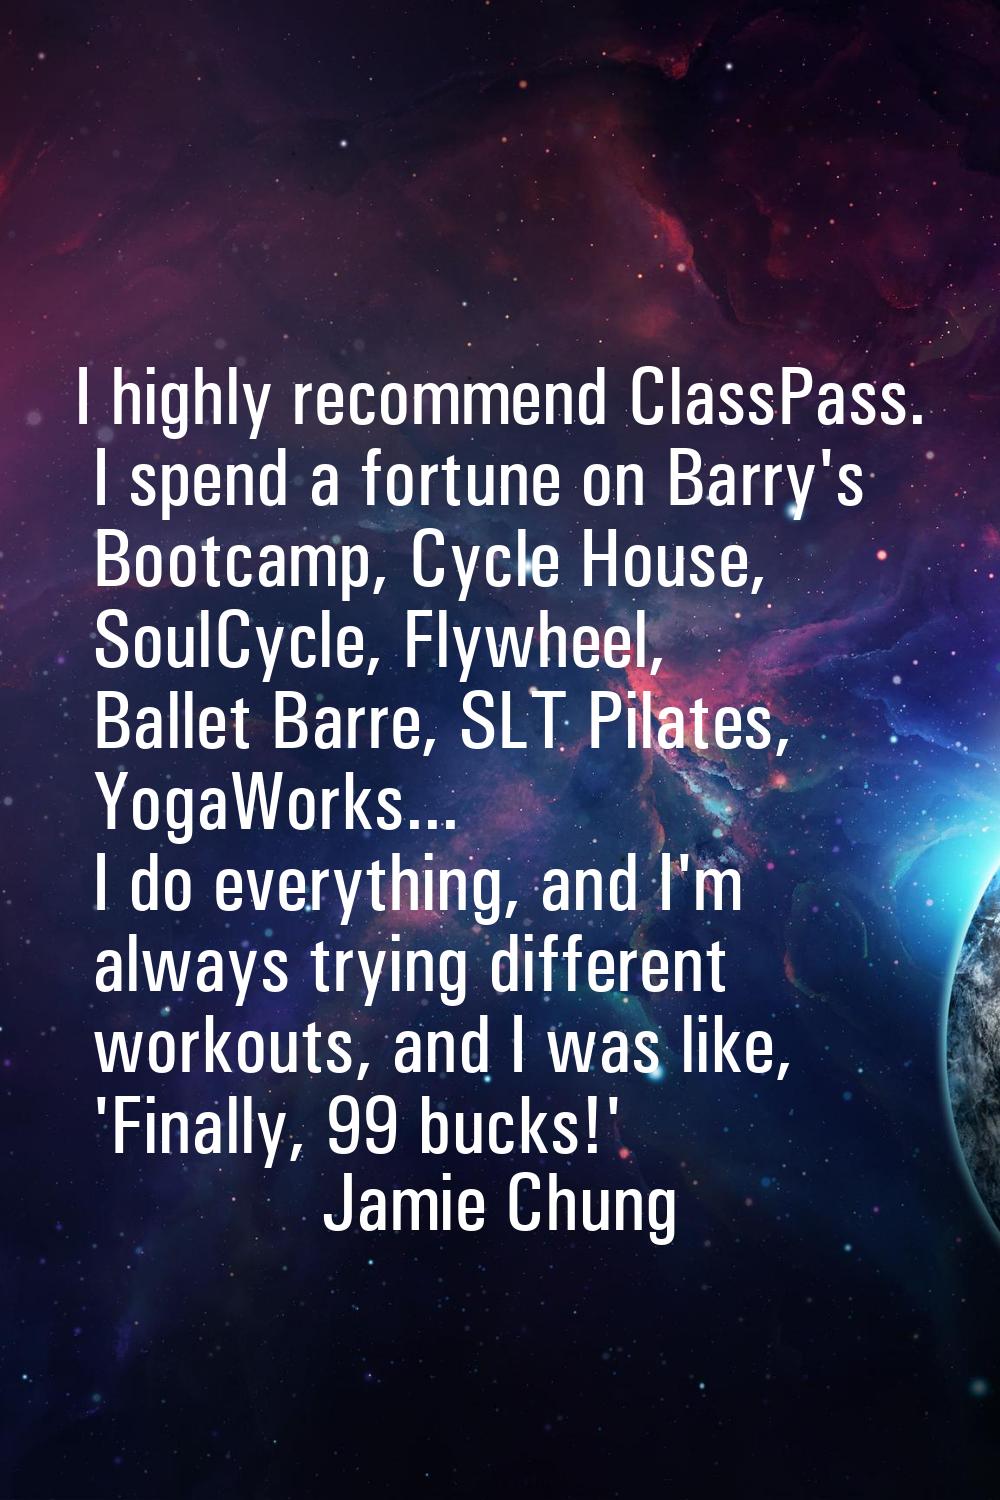 I highly recommend ClassPass. I spend a fortune on Barry's Bootcamp, Cycle House, SoulCycle, Flywhe